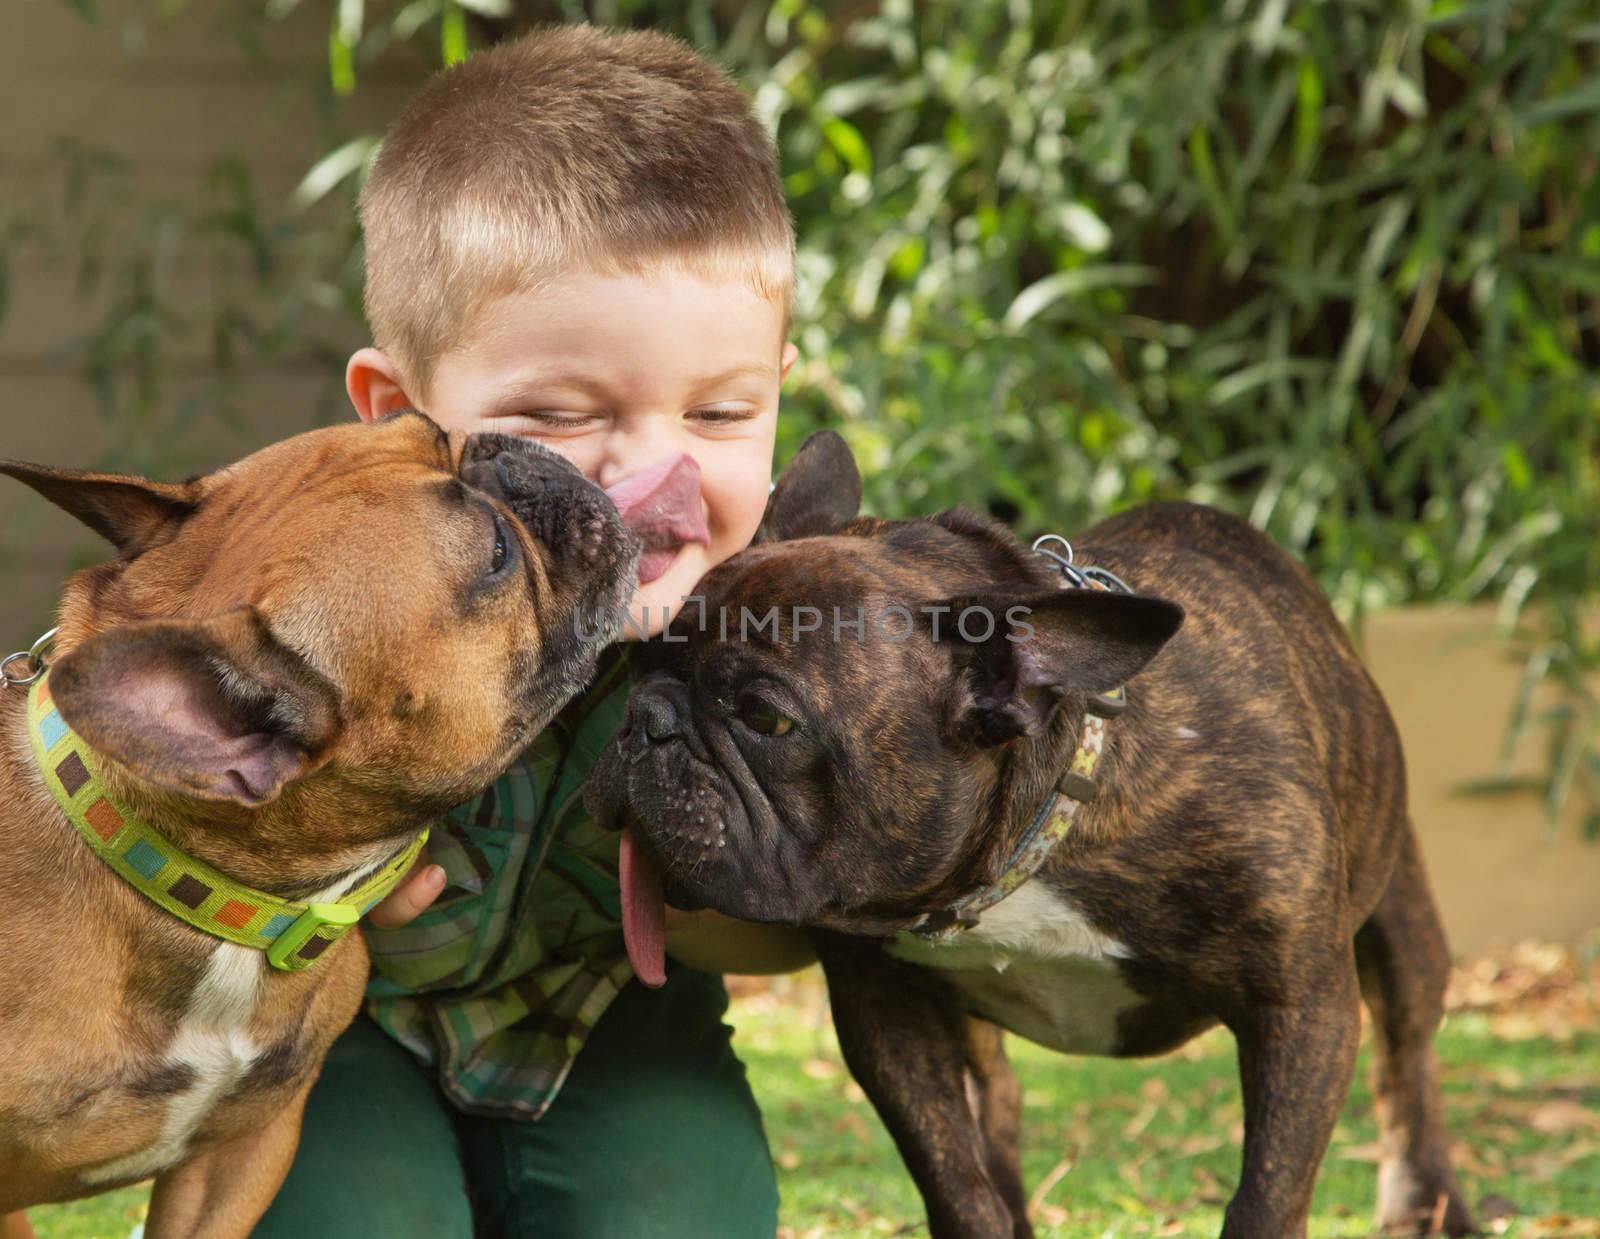 Two bulldogs licking little boy sitting outdoors